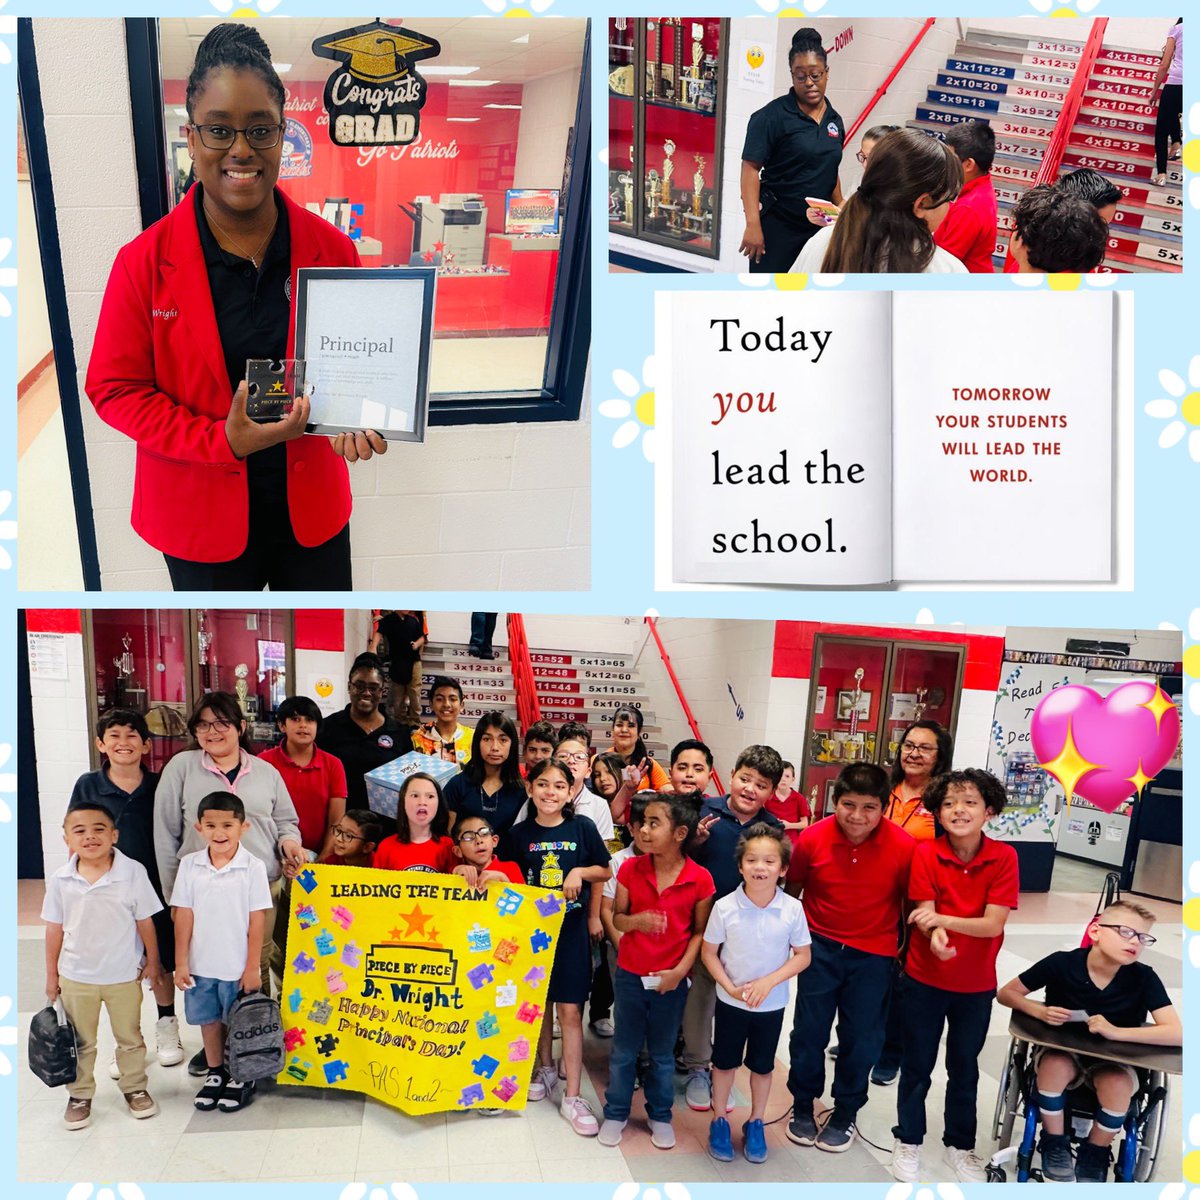 Happy National School Principal Day Dr. Wright! 🎉 @KWright_BMES Thank You for leading our Benito Family 🧩by🧩 Our Patriots Love you so much 💙🤍❤️ #PatriotPride  #BestPrincipal #PowerUpTogether #TeamSISD @JWilliams_BMES